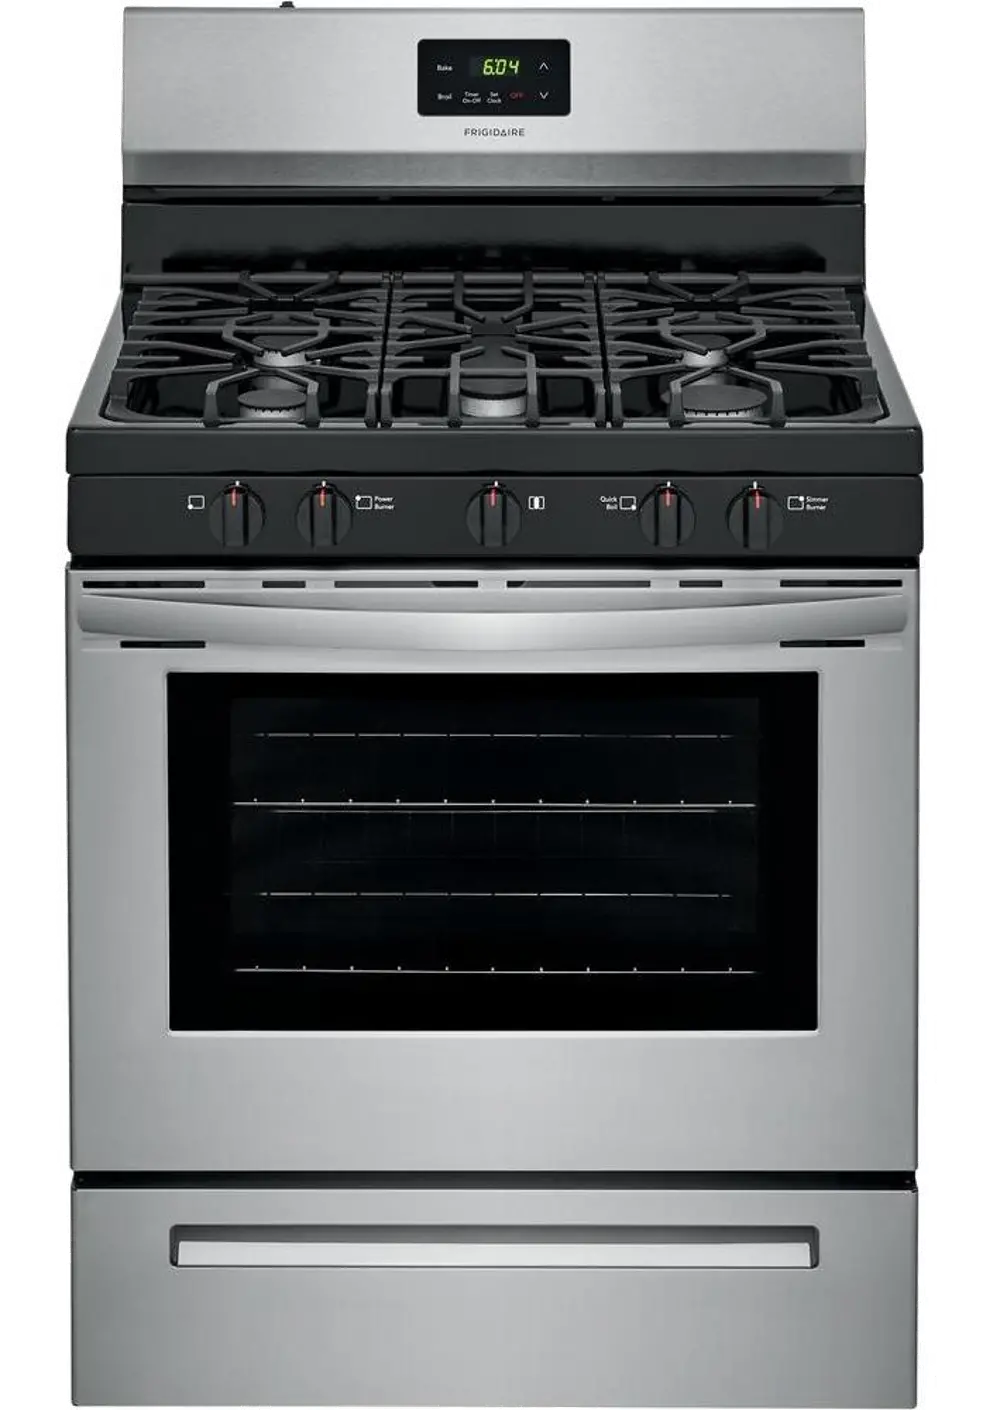 FCRG3052AS Frigidaire 5.0 cu ft Gas Range - Stainless Steel-1